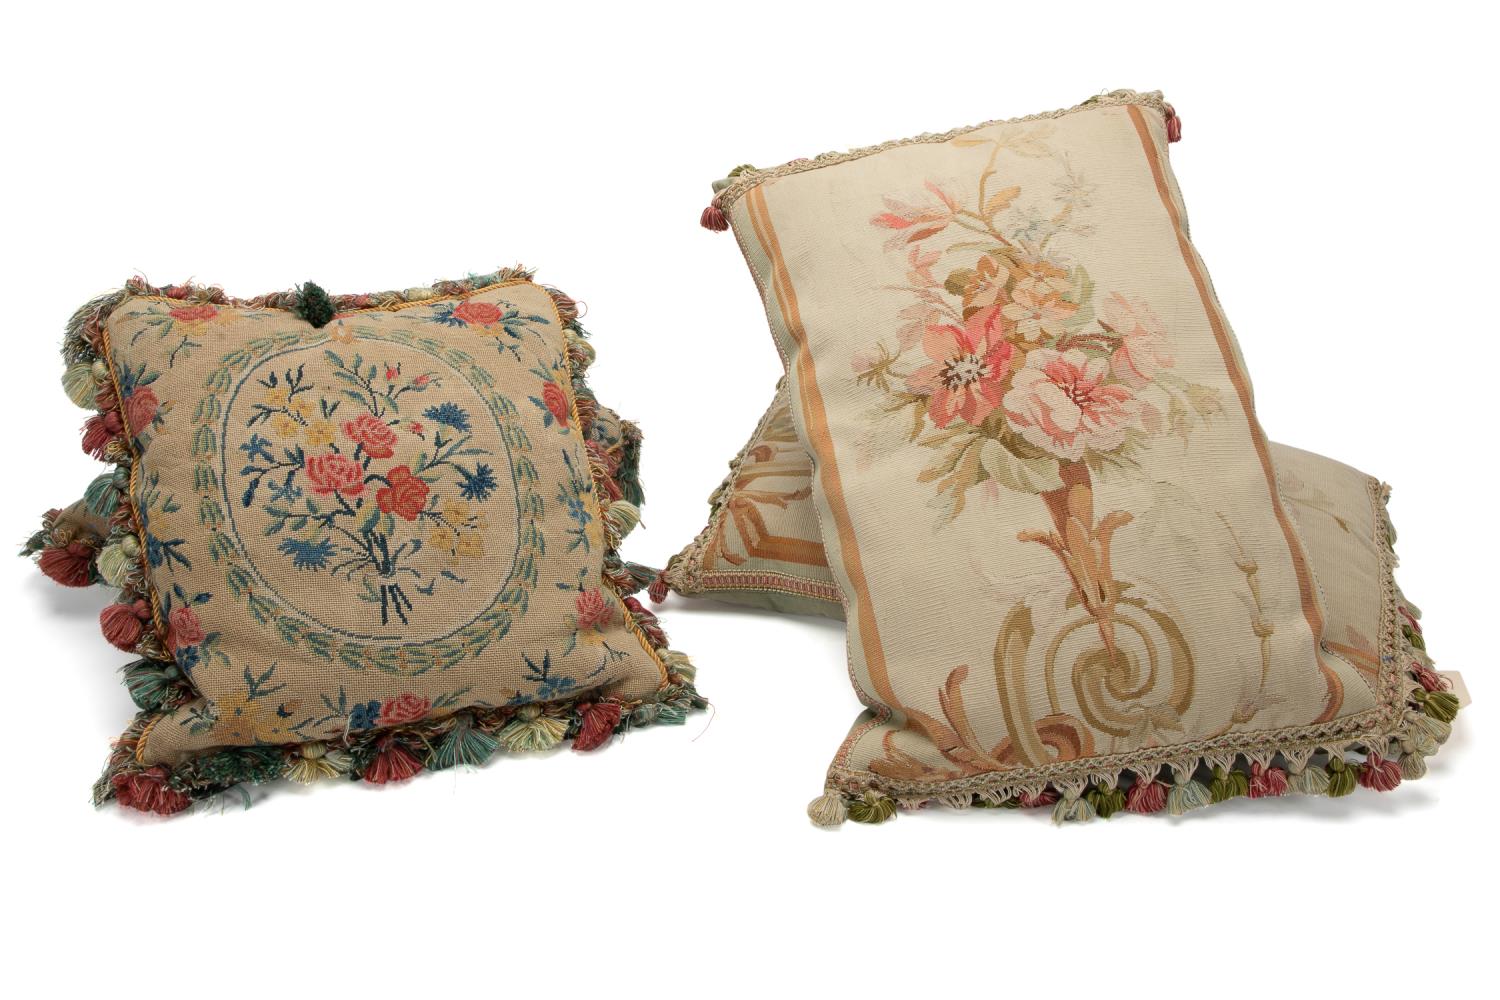 FOUR FLORAL ACCENTS PILLOWS TWO 357c75